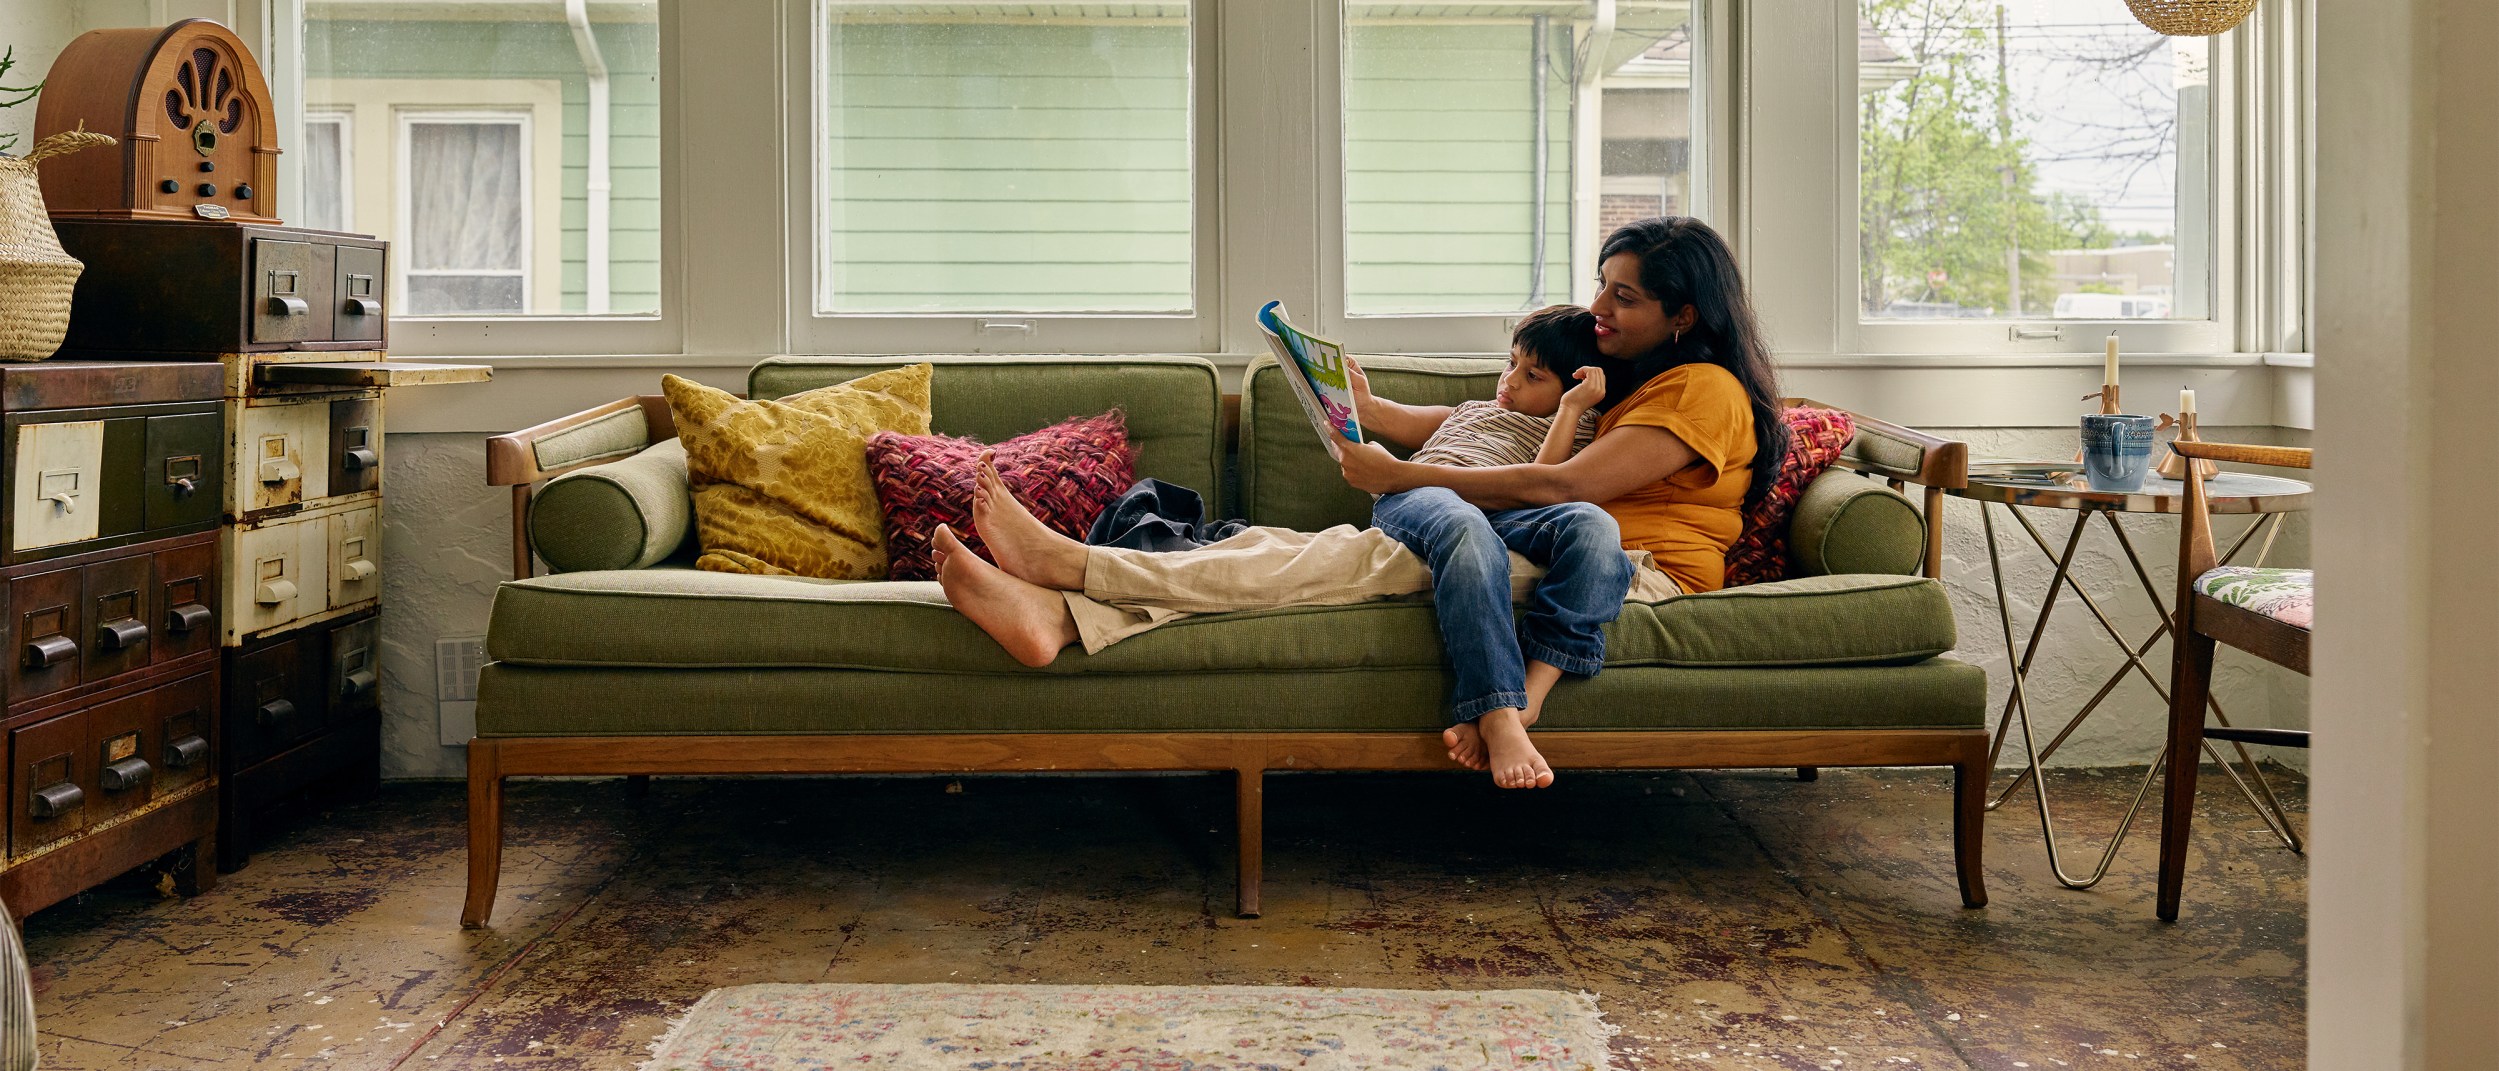 A mother reads a magazine on a vintage couch with her son in her lap while staying at an Airbnb listing.